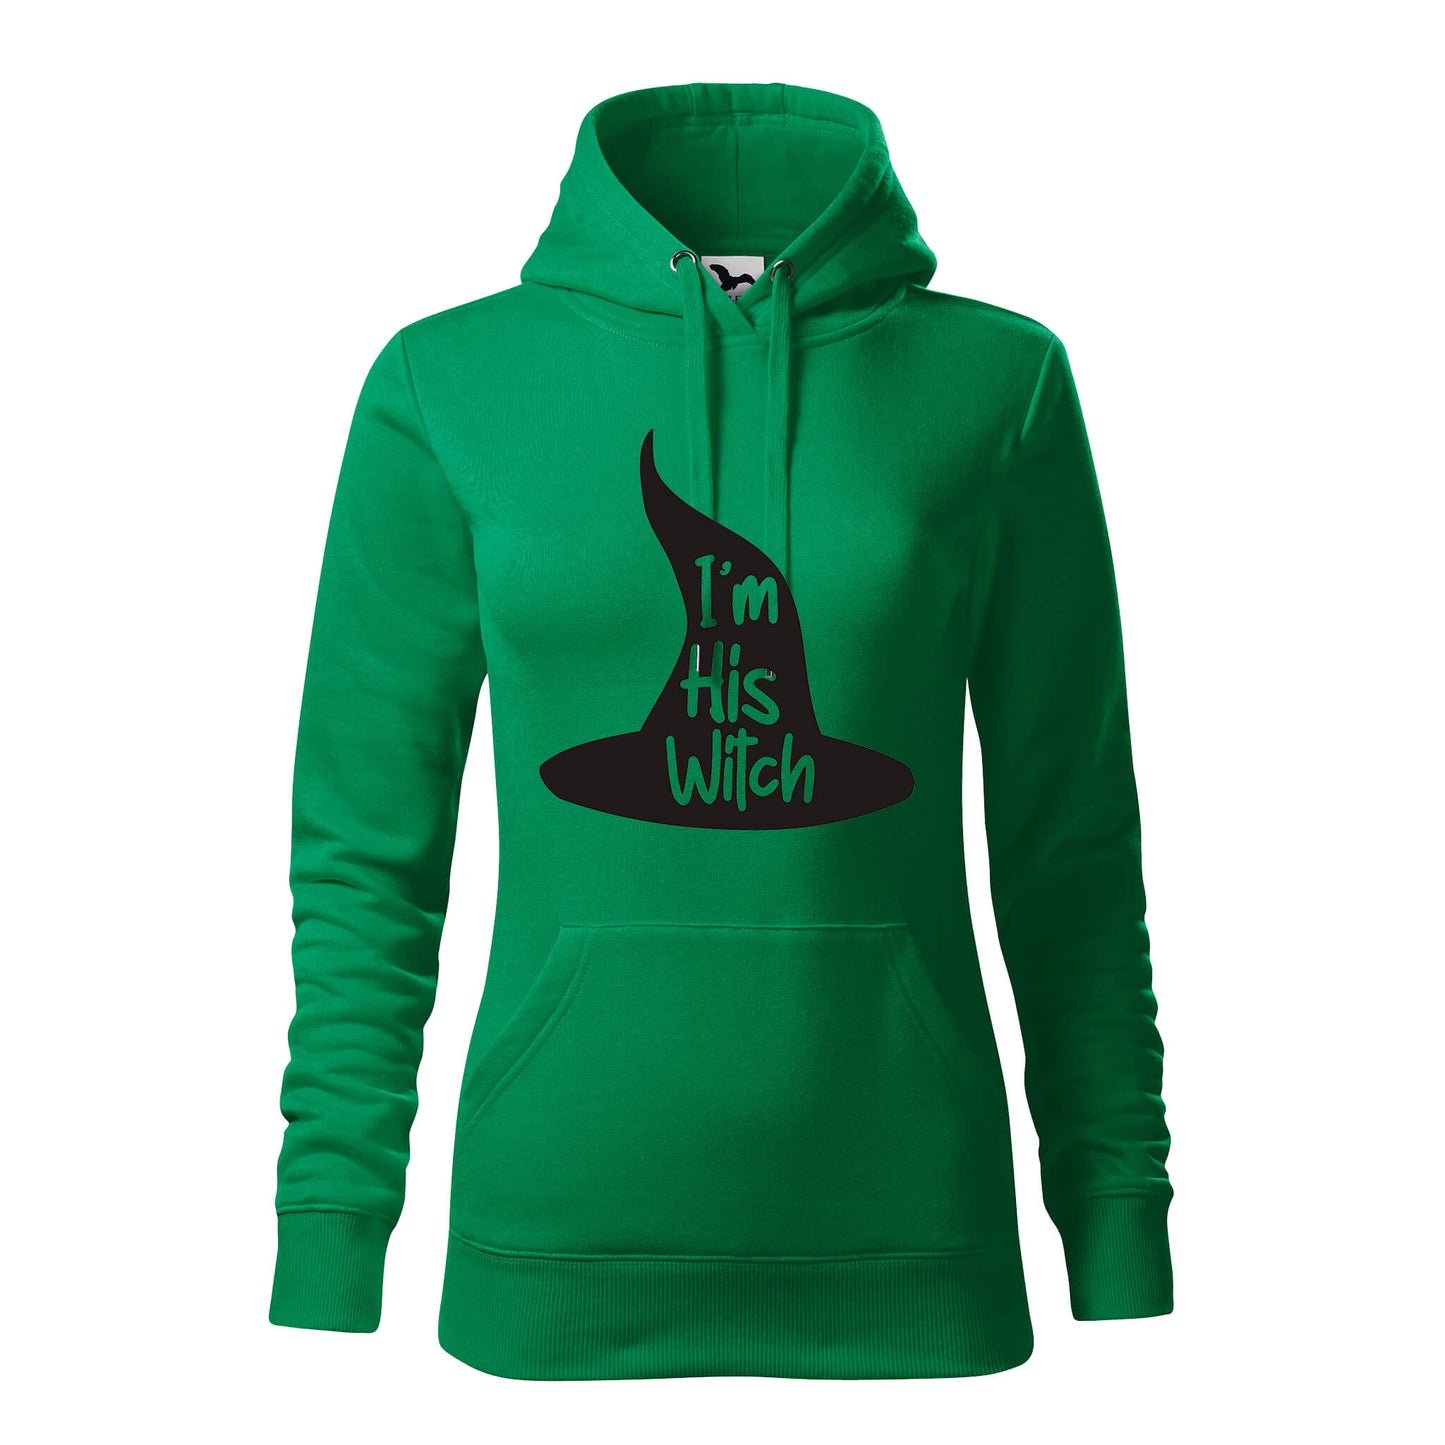 Im his witch hoodie - rvdesignprint